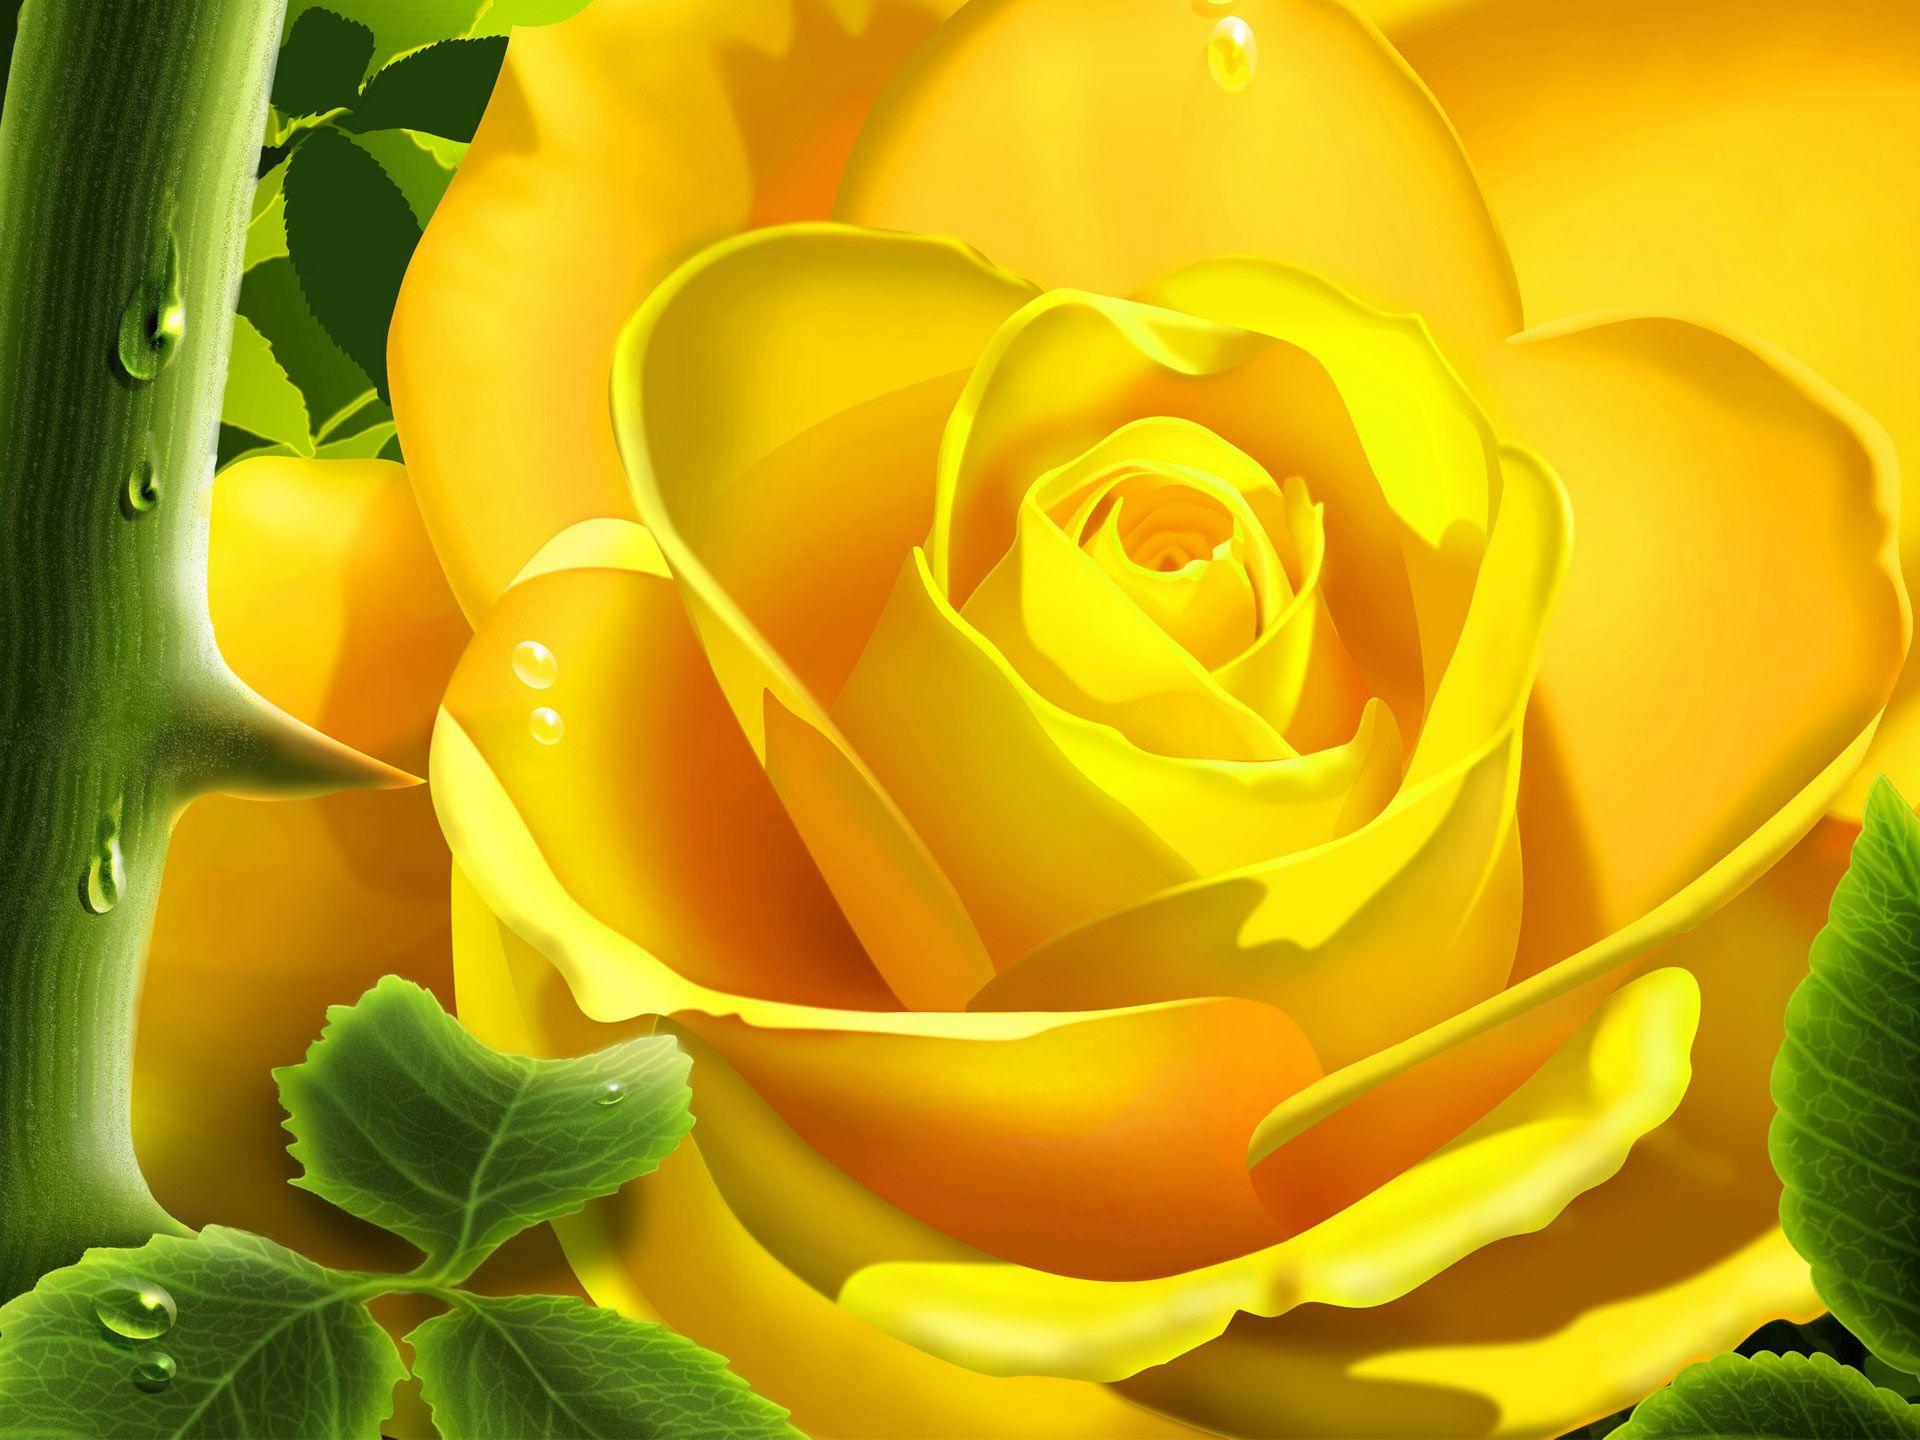 Single yellow Rose Flowers Nature Background Wallpaper on 1920x1440